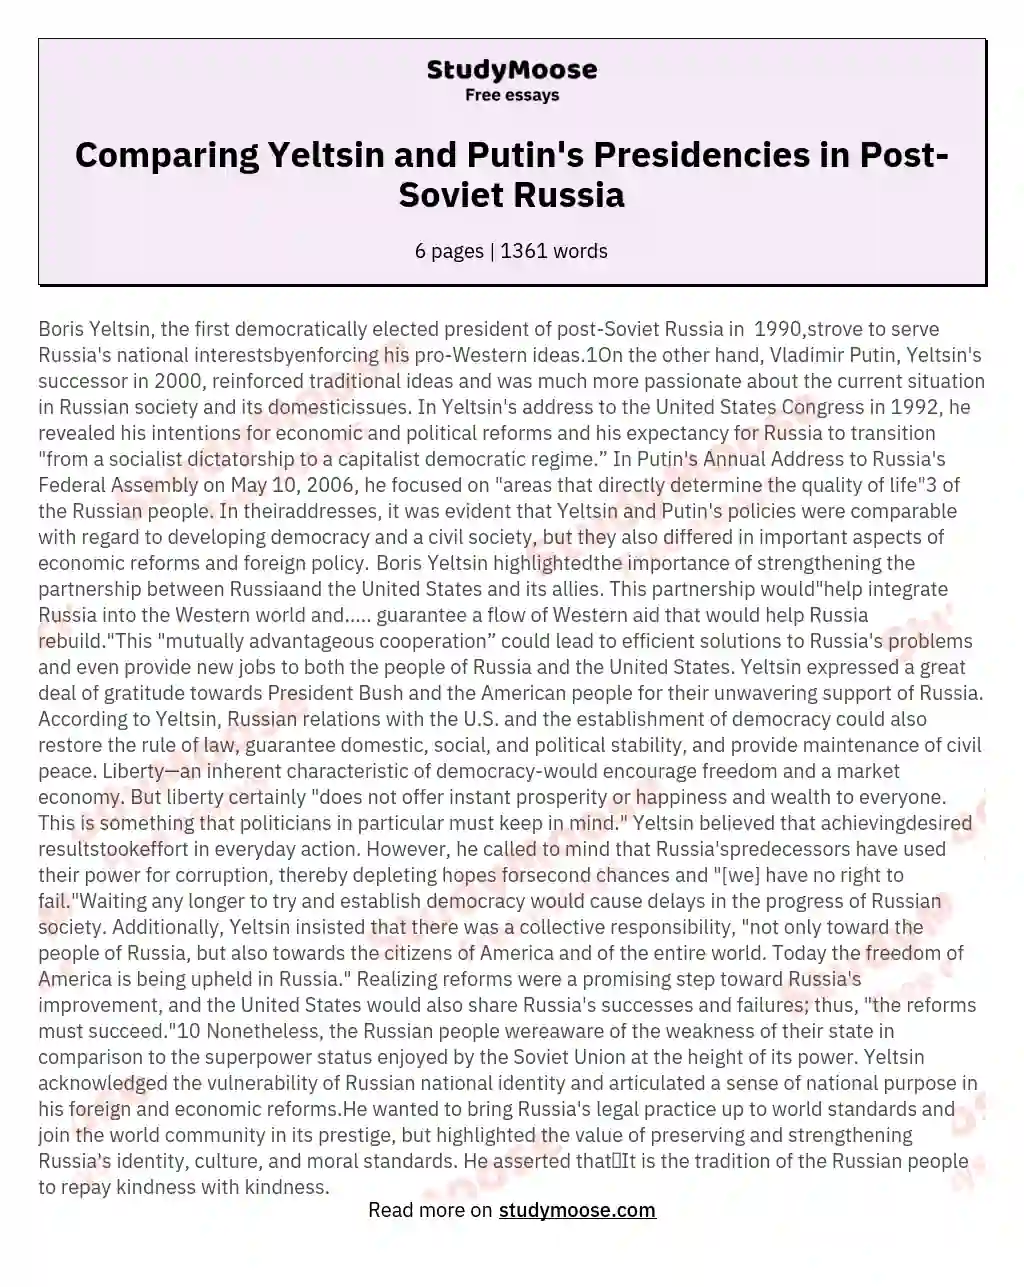 Comparing Yeltsin and Putin's Presidencies in Post-Soviet Russia essay